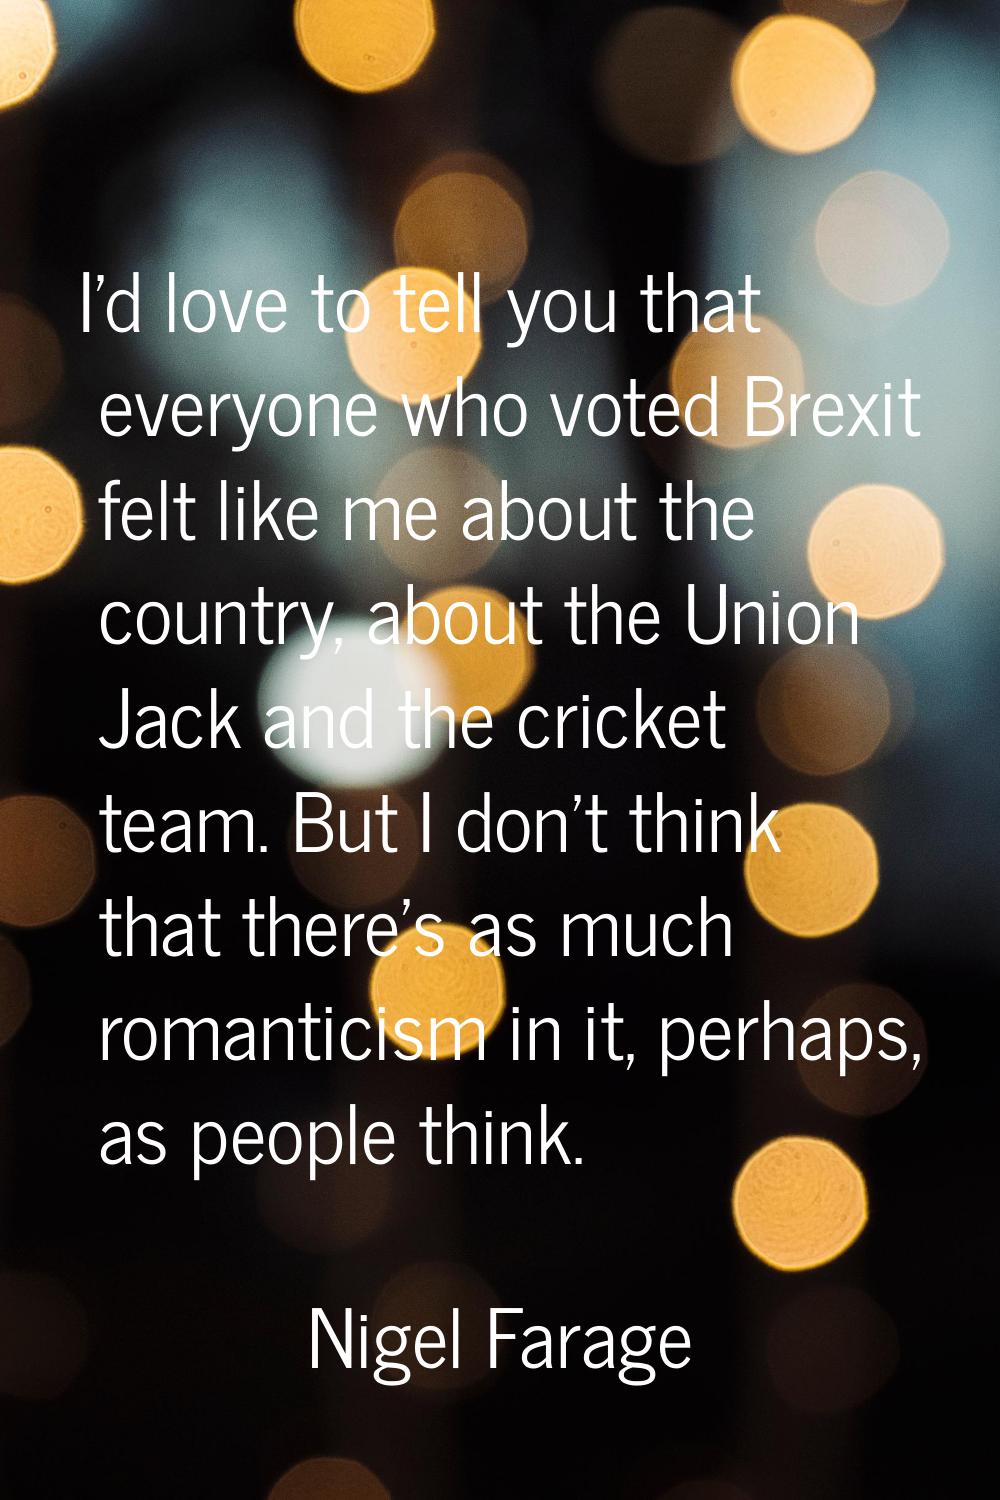 I'd love to tell you that everyone who voted Brexit felt like me about the country, about the Union